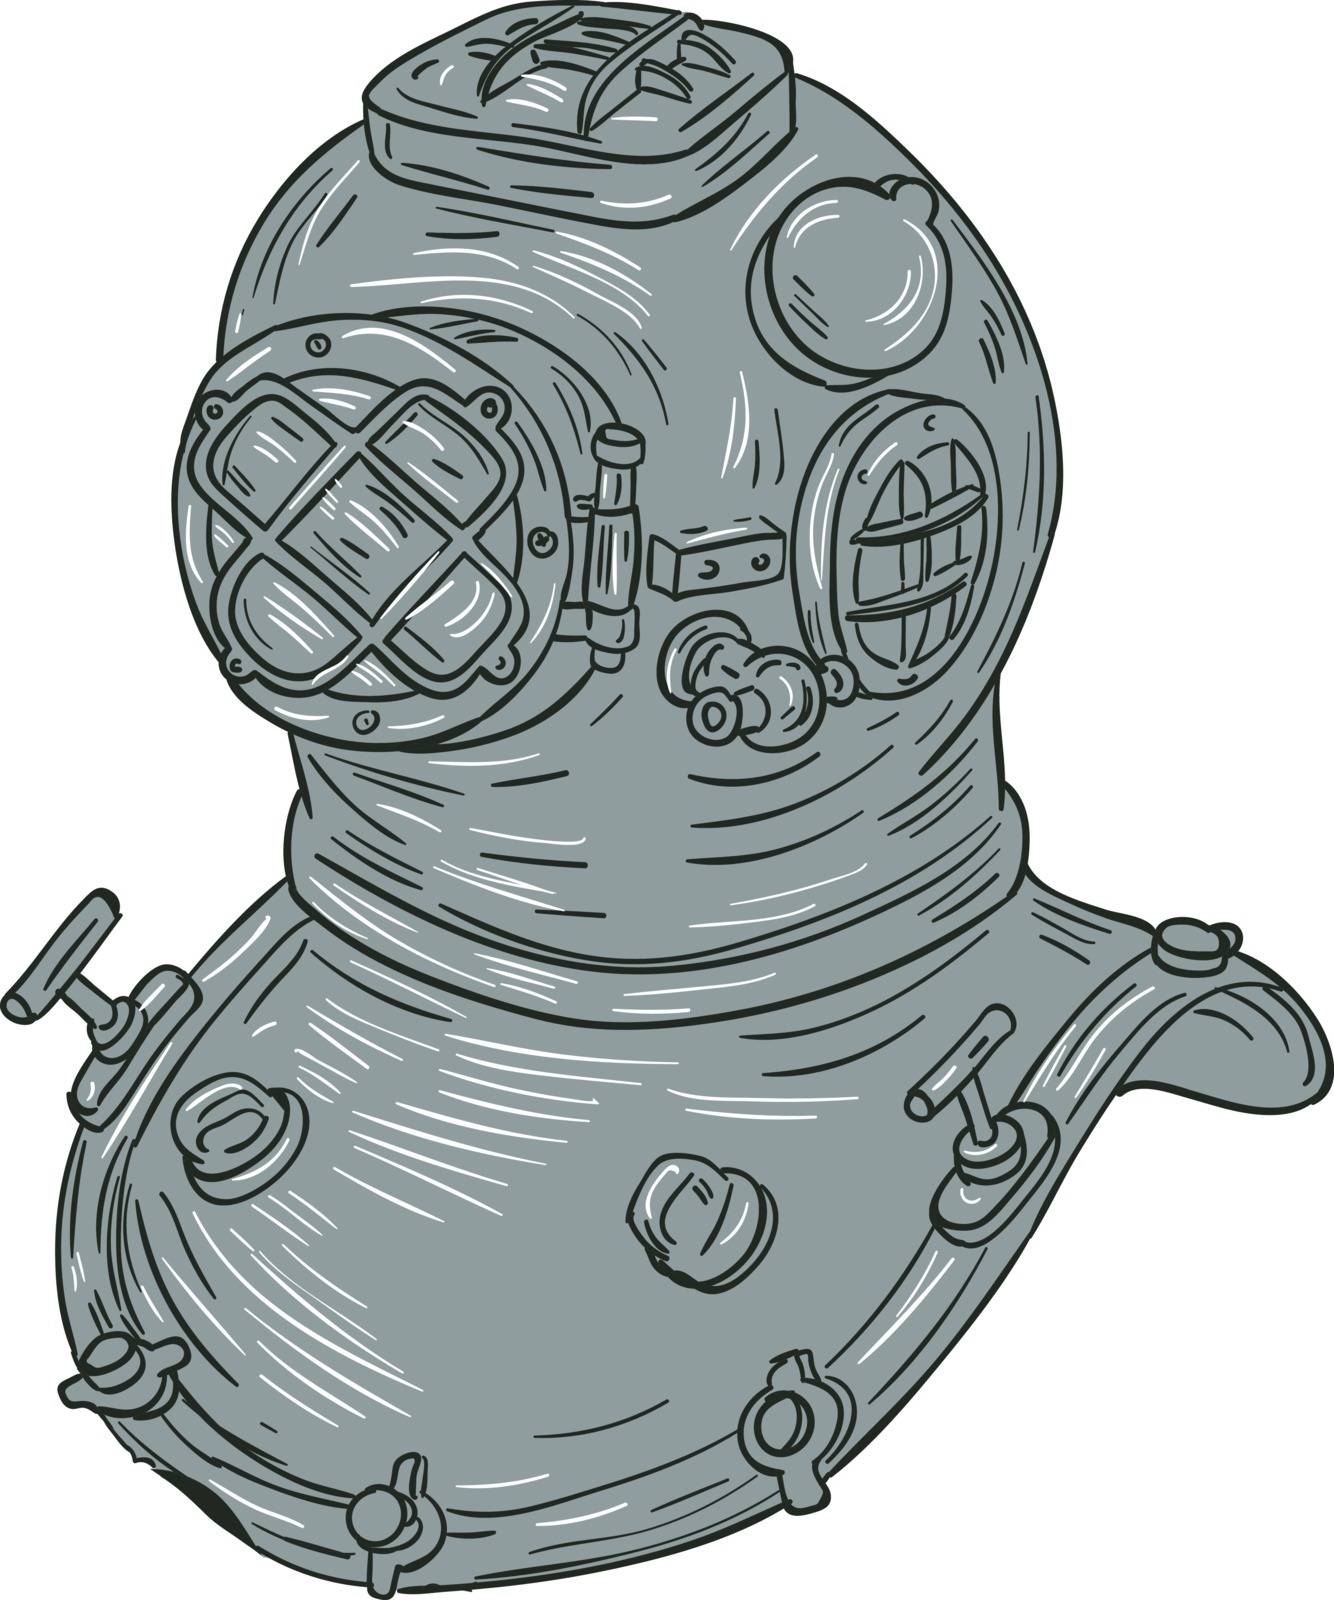 Drawing sketch style illustration of a copper and brass old school deep sea dive diving helmet or Standard diving helmet (Copper hat), worn mainly by professional divers engaged in surface supplied diving set on isolated white background. 